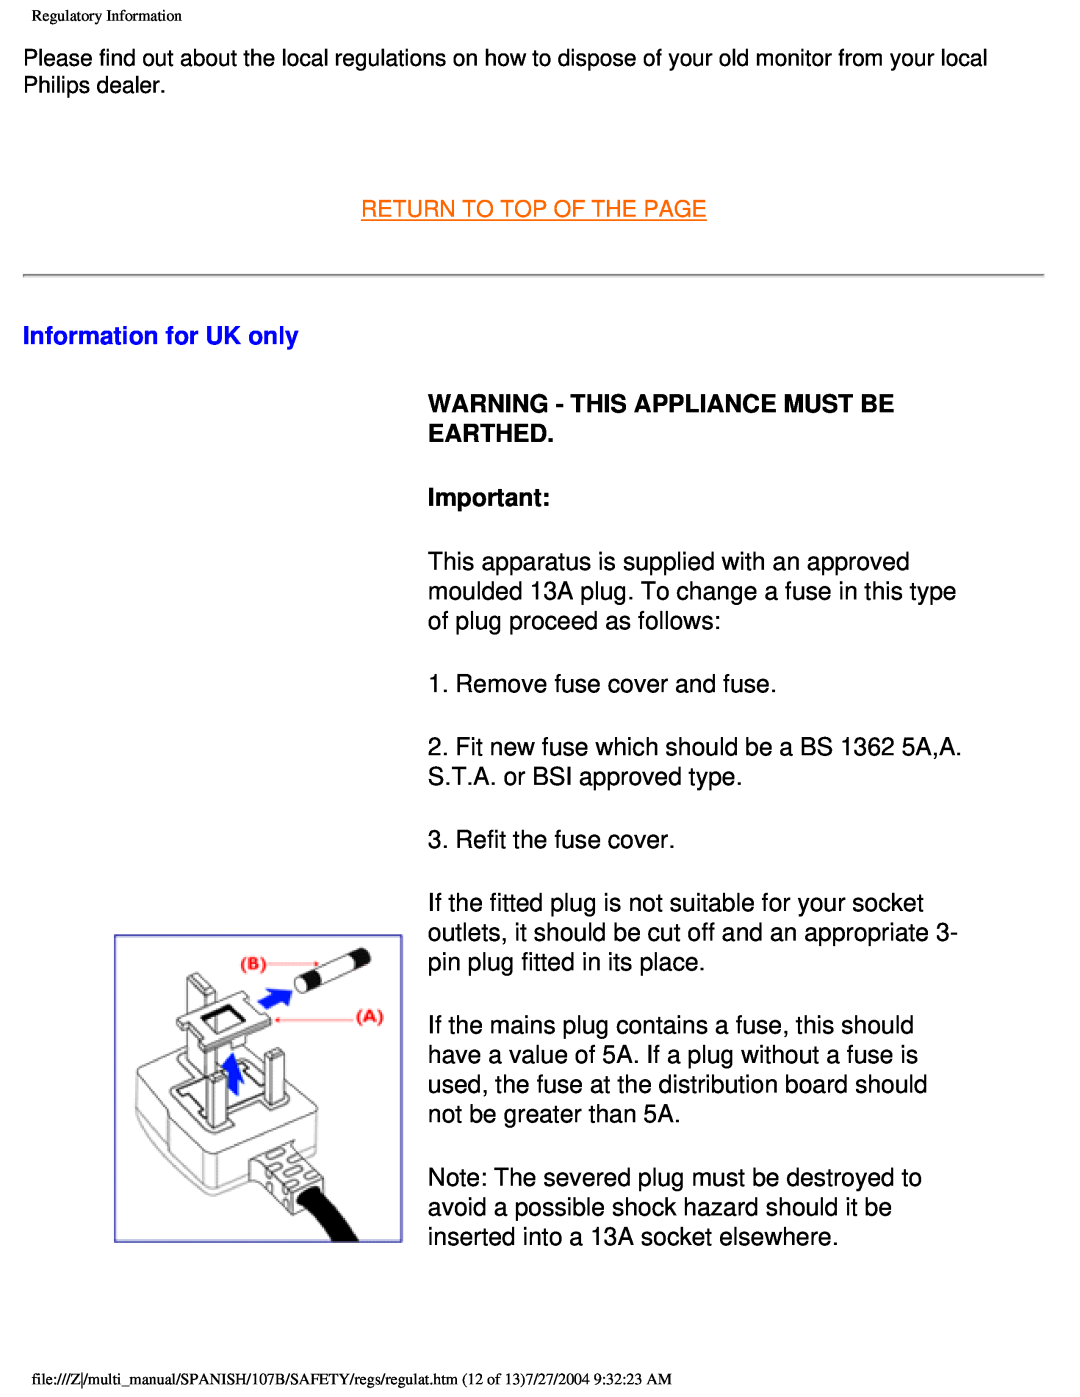 Philips 107B user manual Information for UK only, Warning - This Appliance Must Be Earthed 